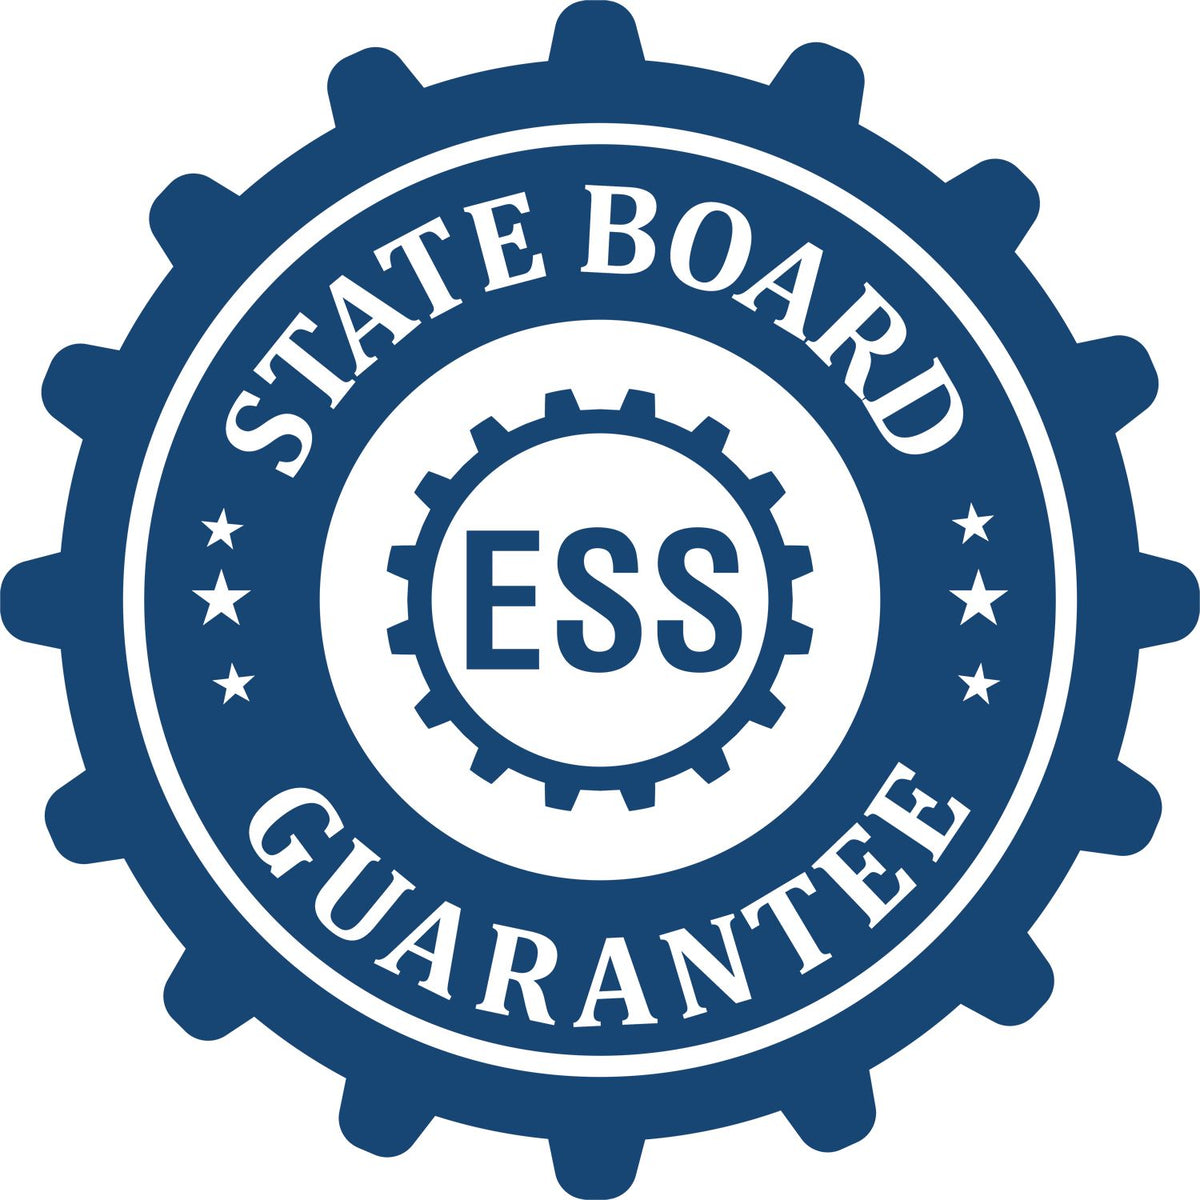 An emblem in a gear shape illustrating a state board guarantee for the Digital New Jersey PE Stamp and Electronic Seal for New Jersey Engineer product.